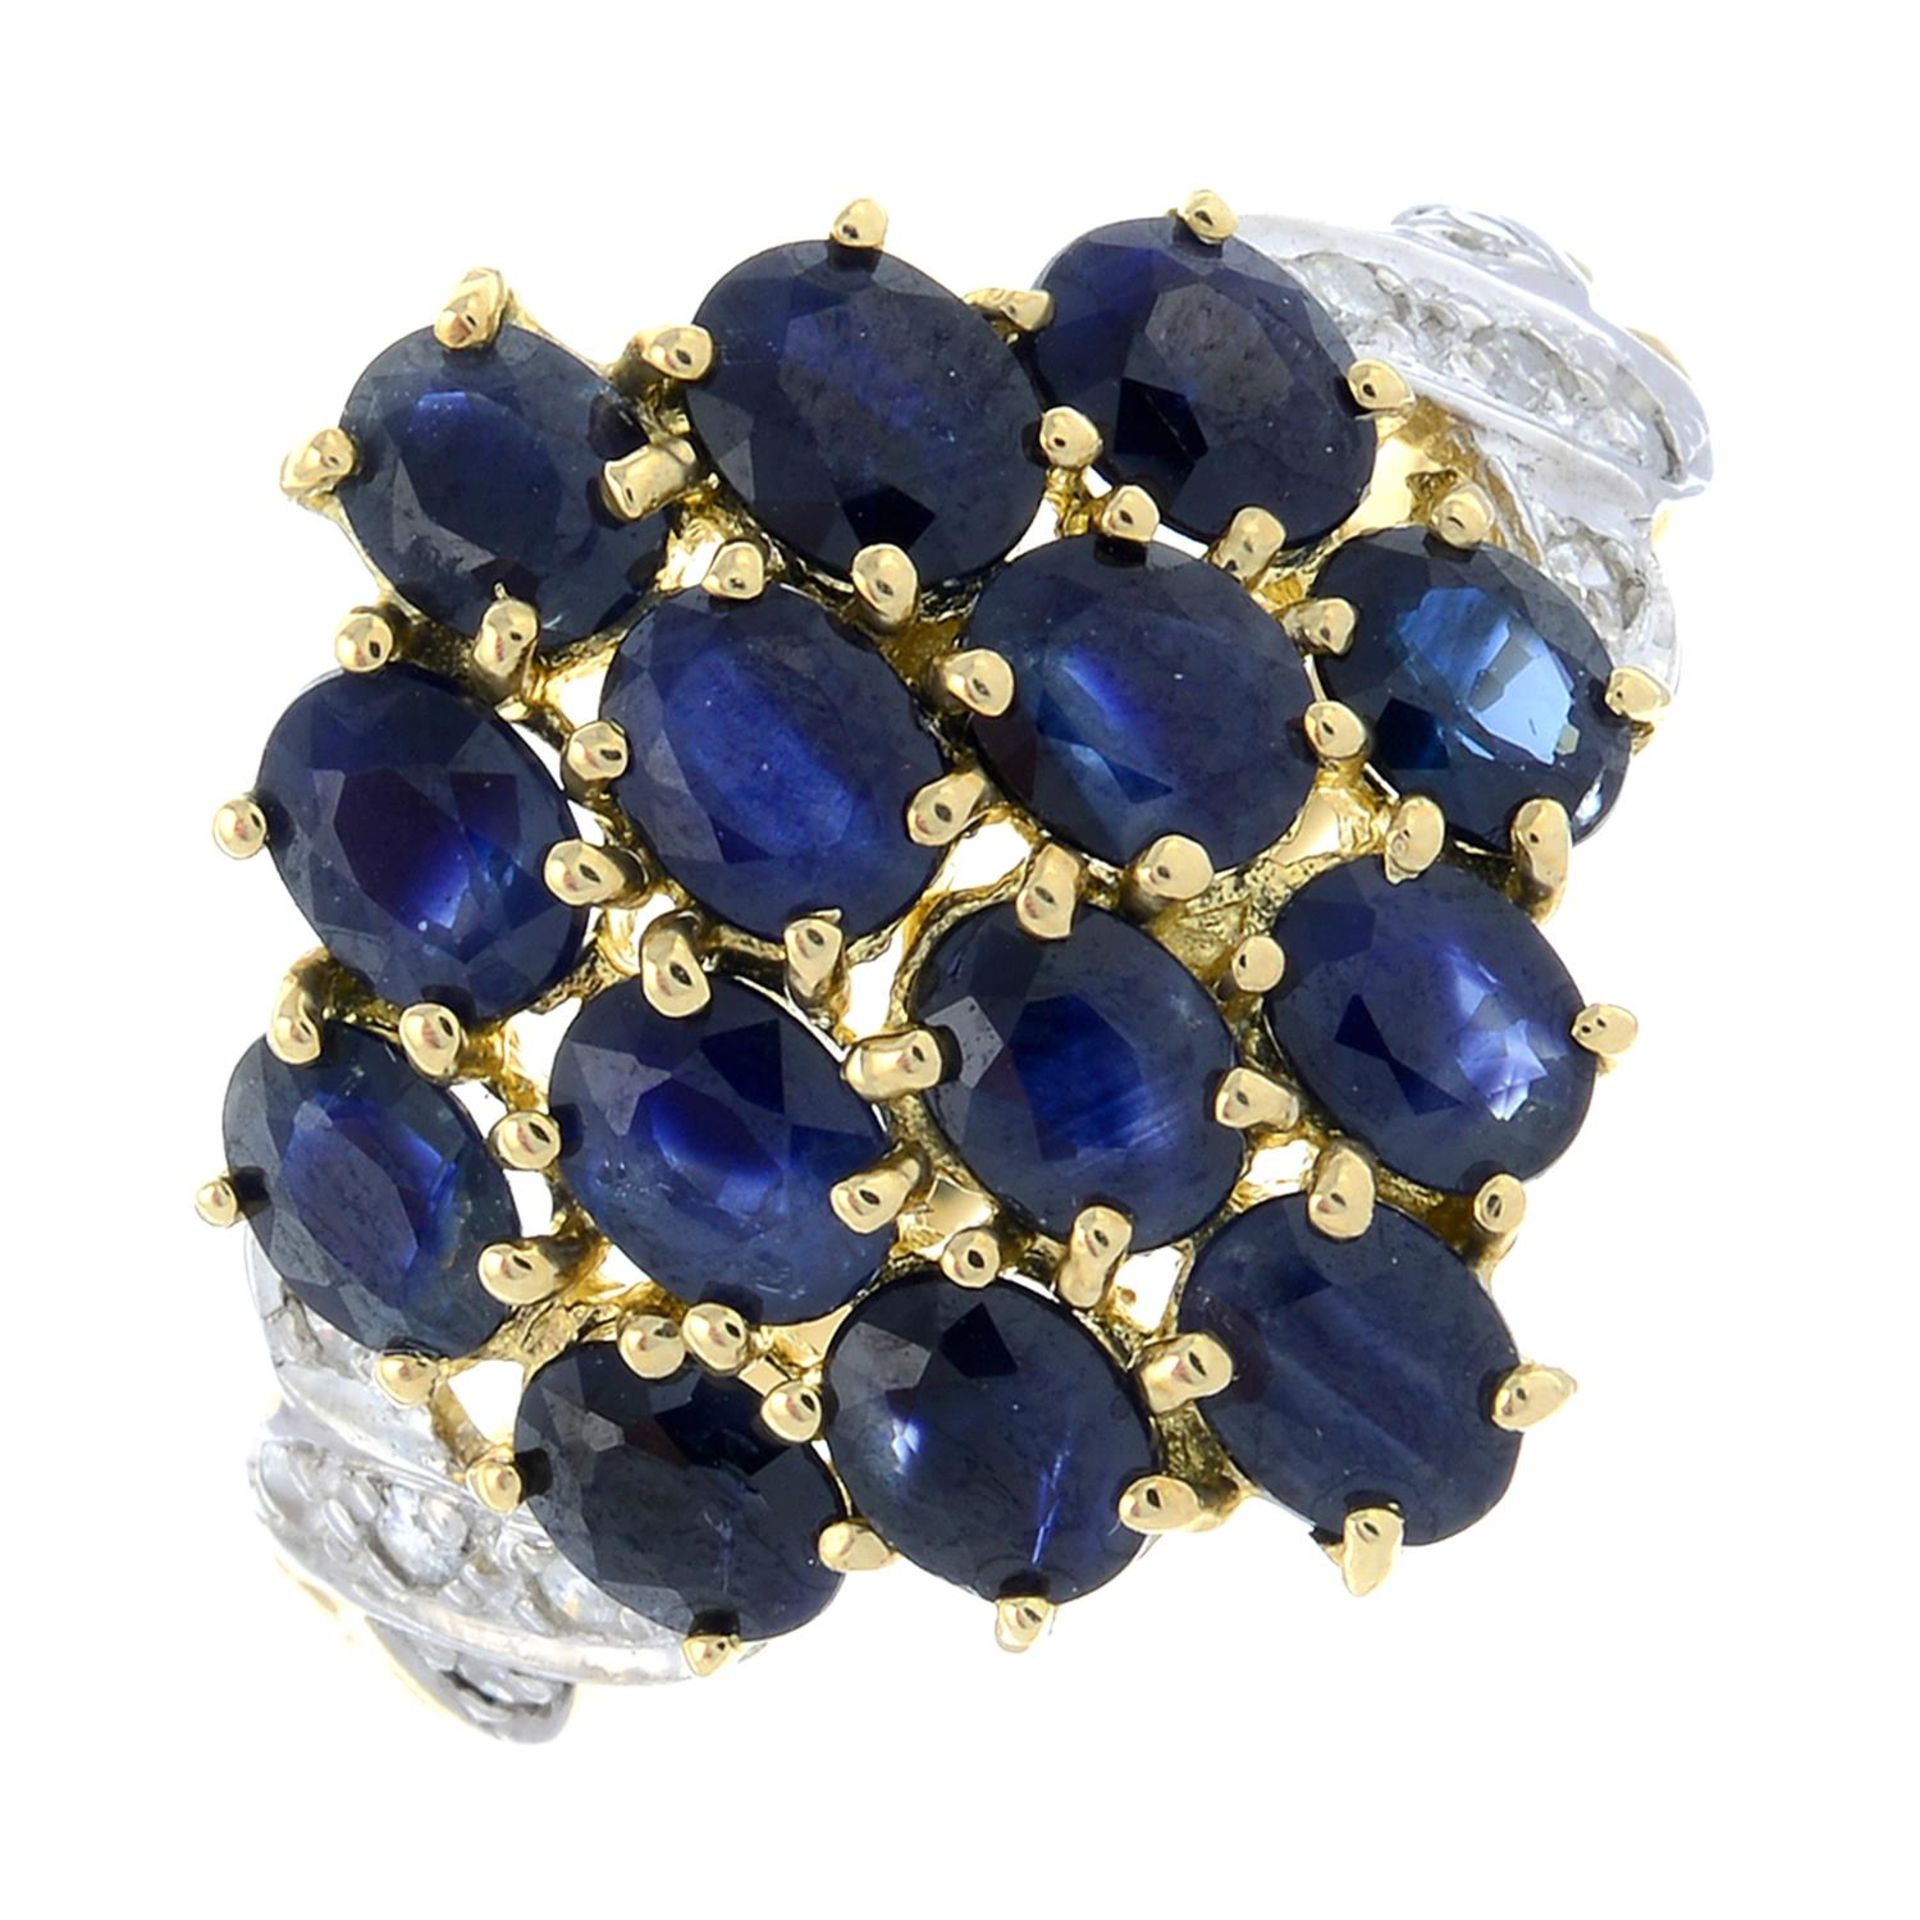 A 9ct gold sapphire and diamond dress ring.